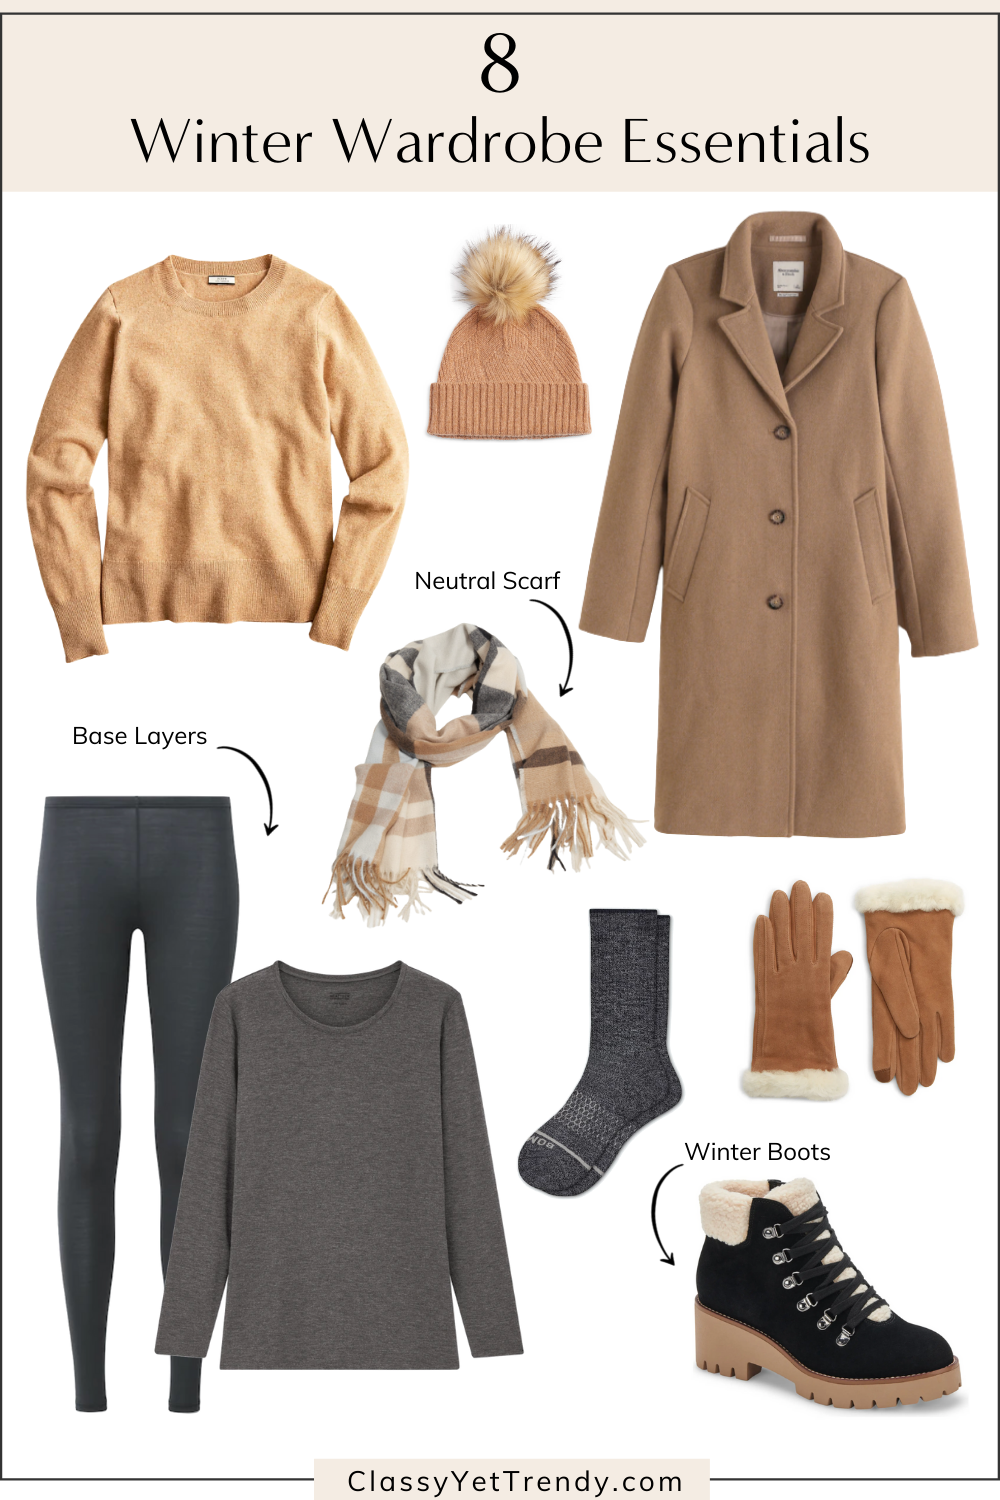 The One Item Every Woman Needs in her Winter Wardrobe - Southern